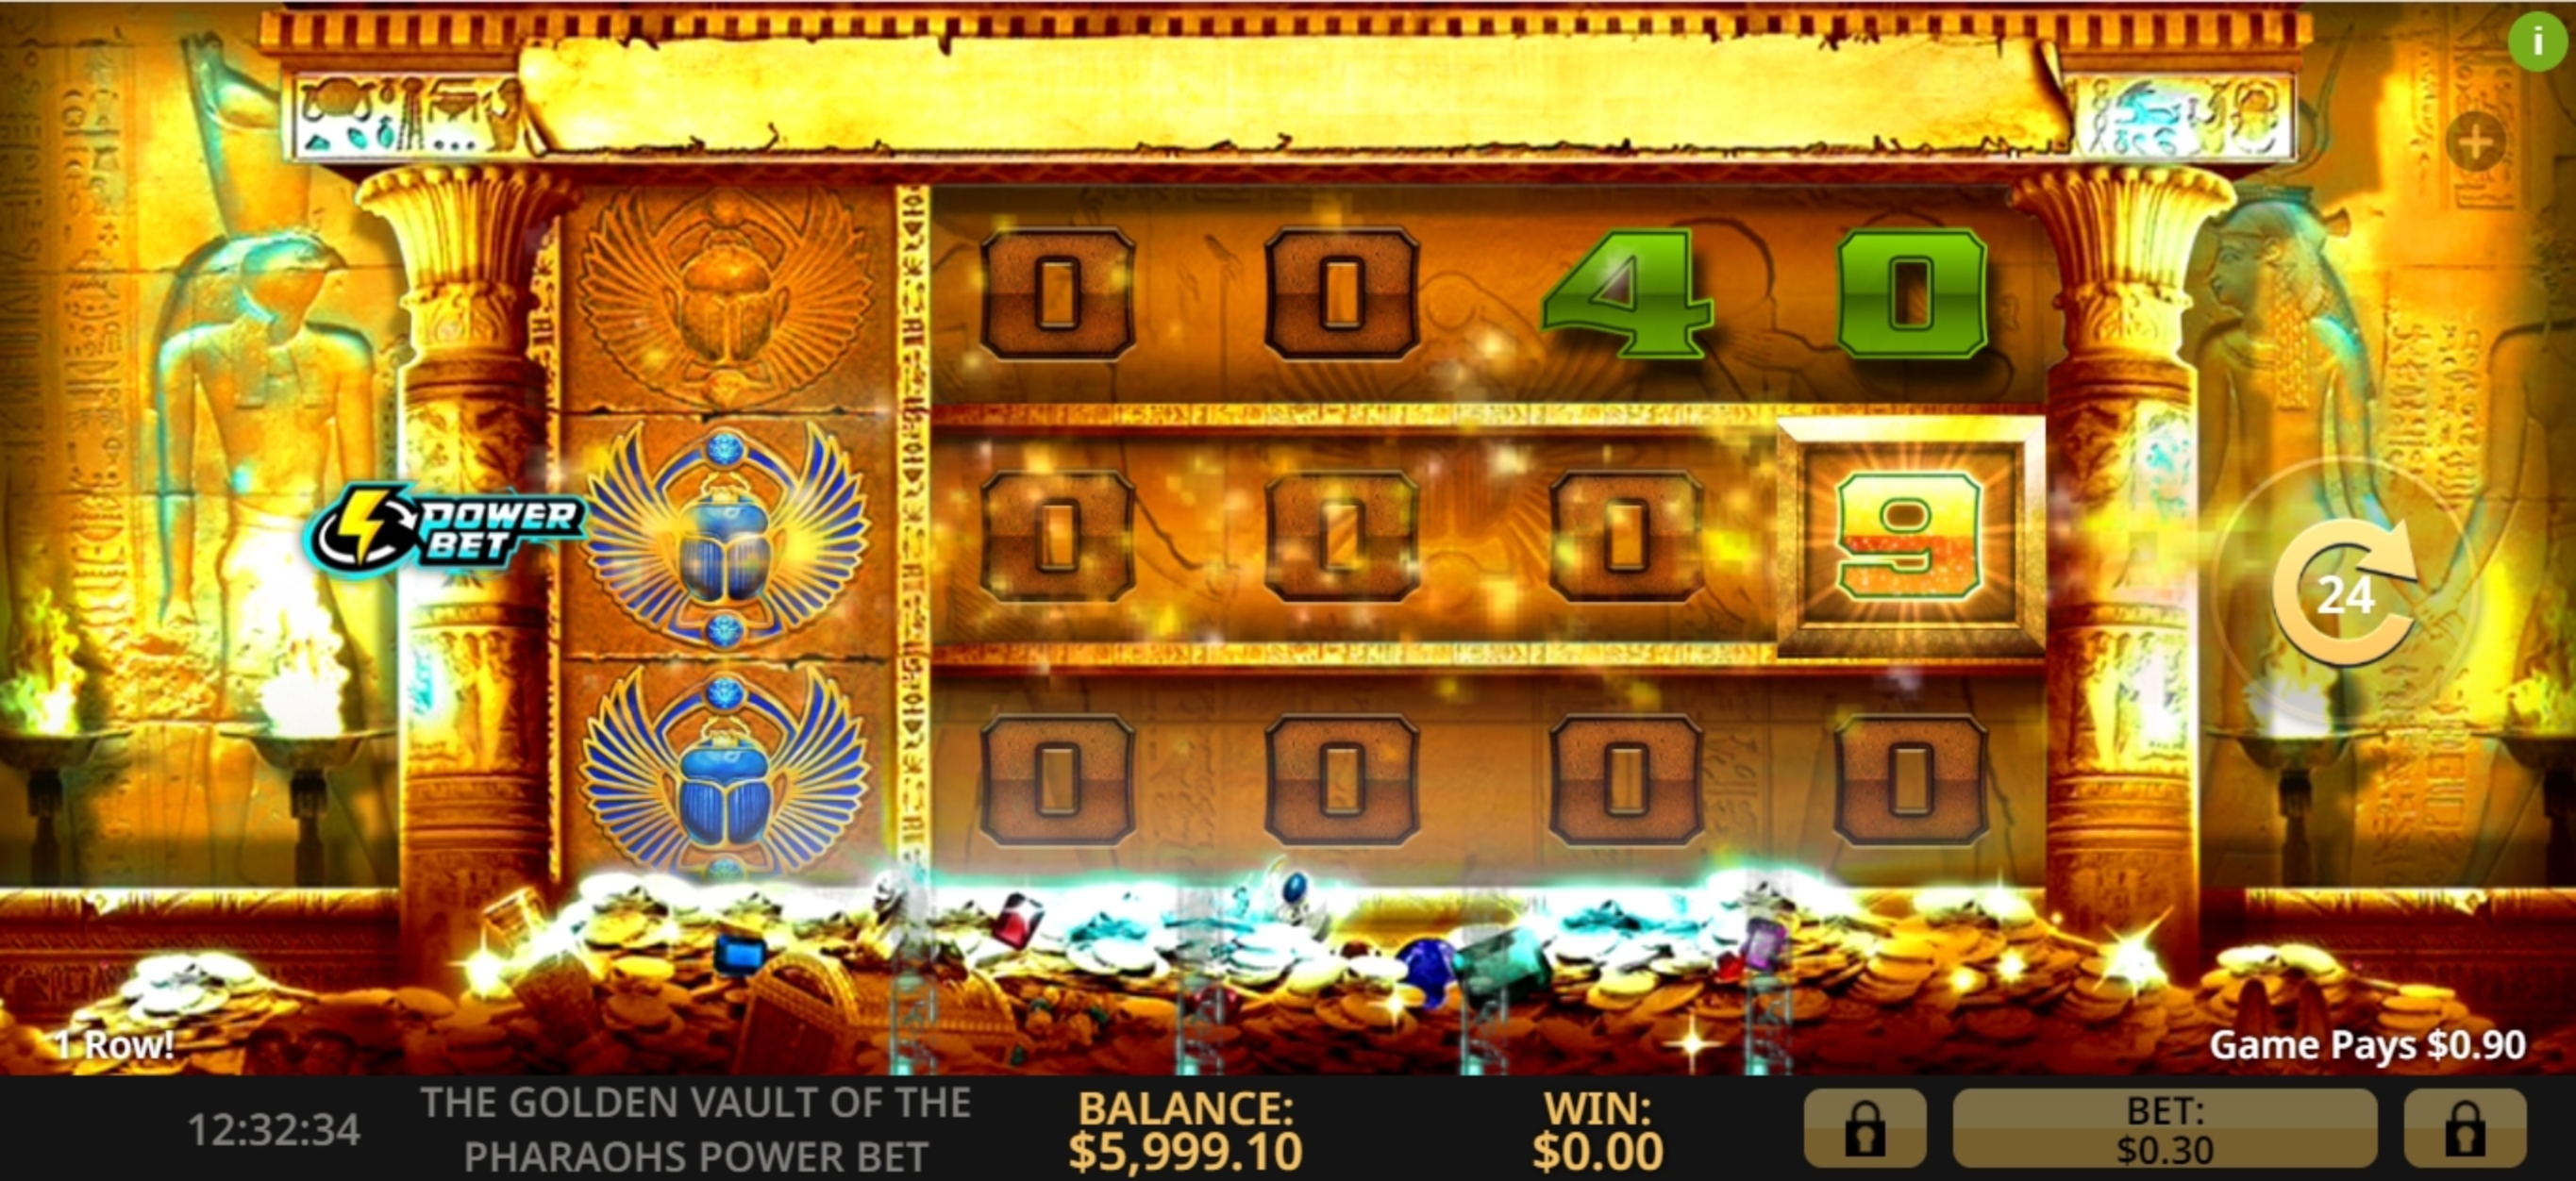 Win Money in The Golden Vault Of The Pharaohs Power Bet Free Slot Game by High 5 Games